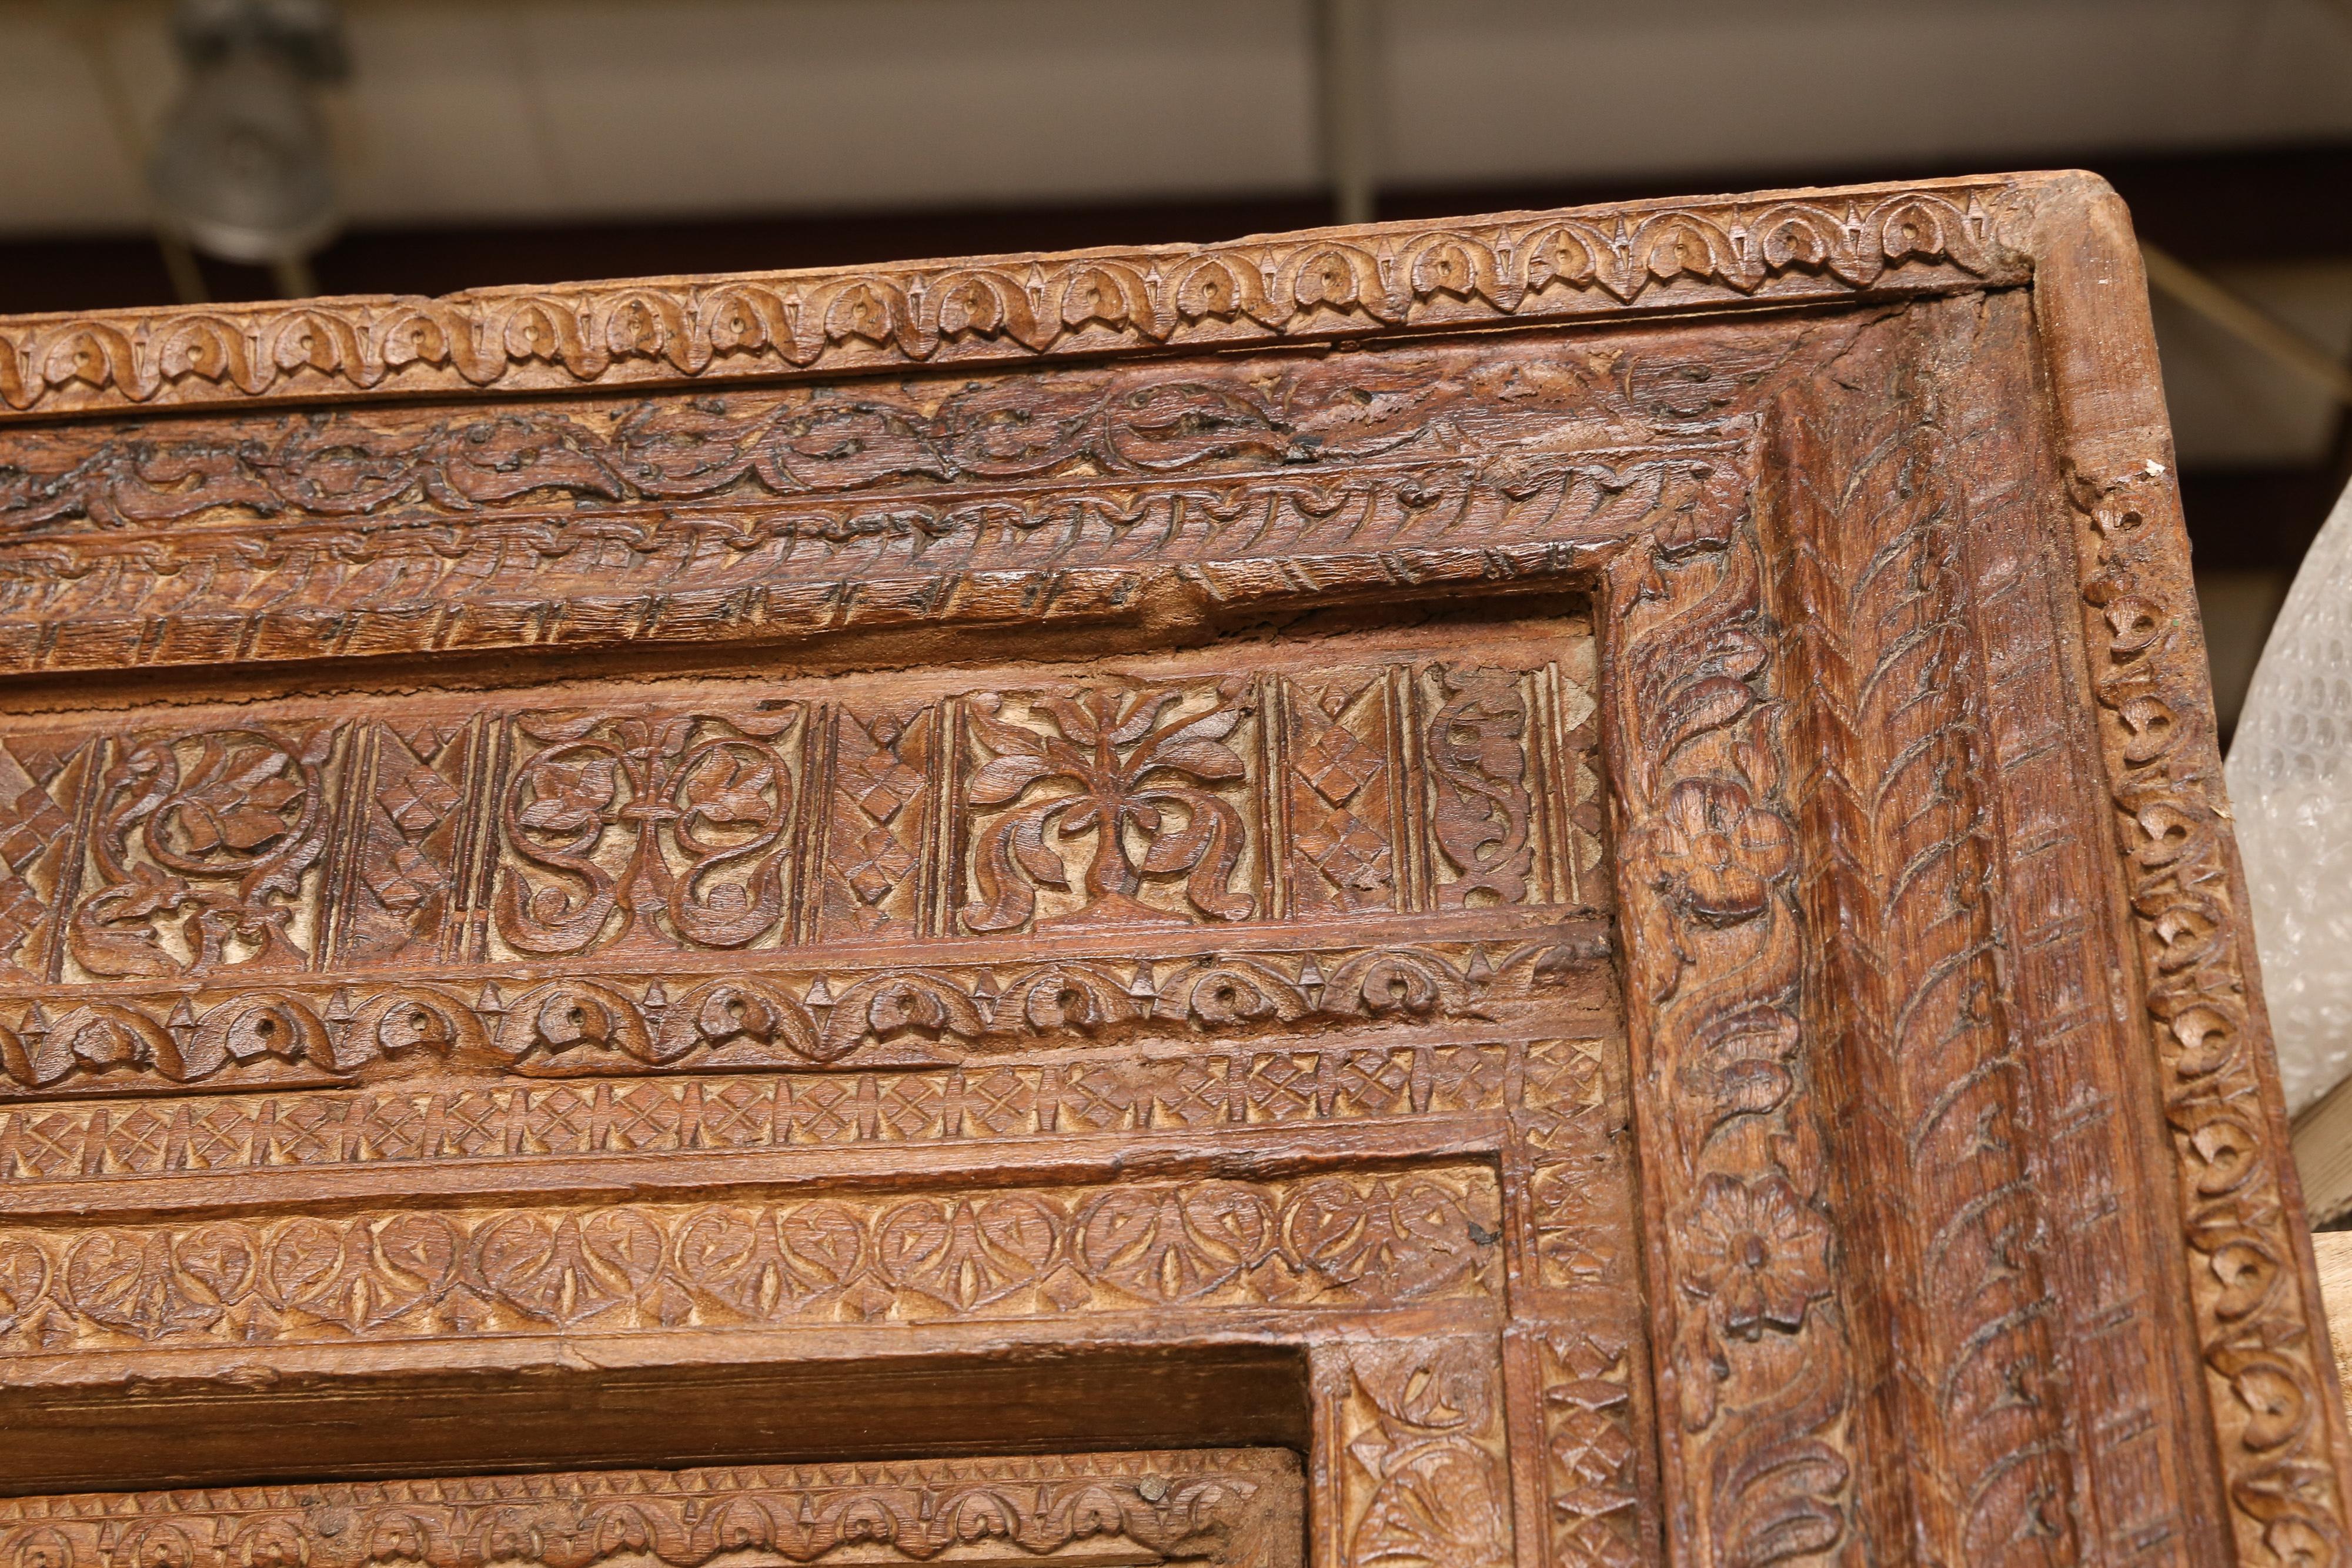 Hand-Crafted Metal Studded Highly Carved Solid Teak Wood Entry Door of a Temple Priest Home